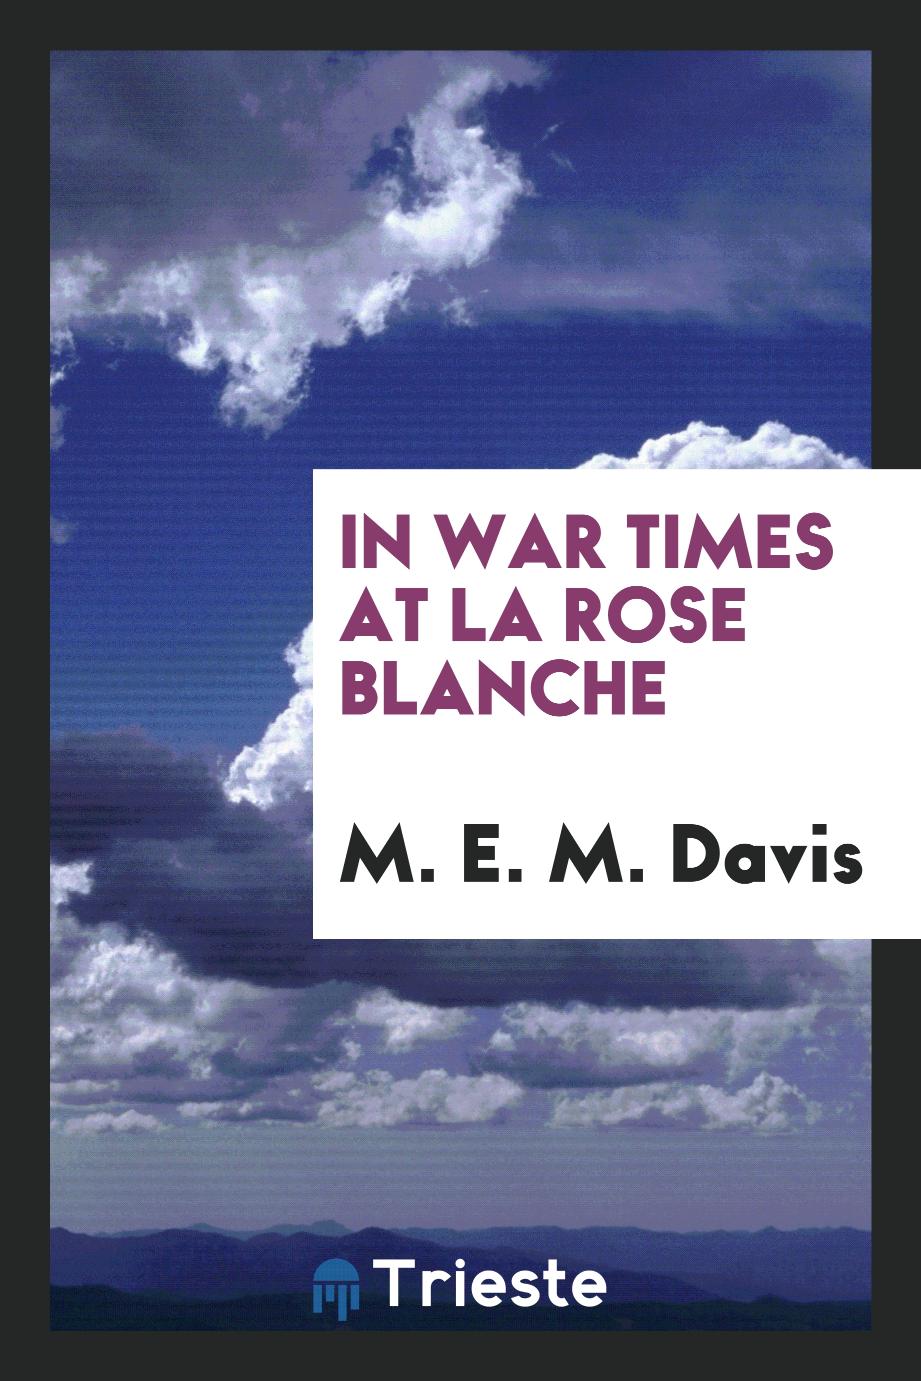 In war times at La Rose Blanche